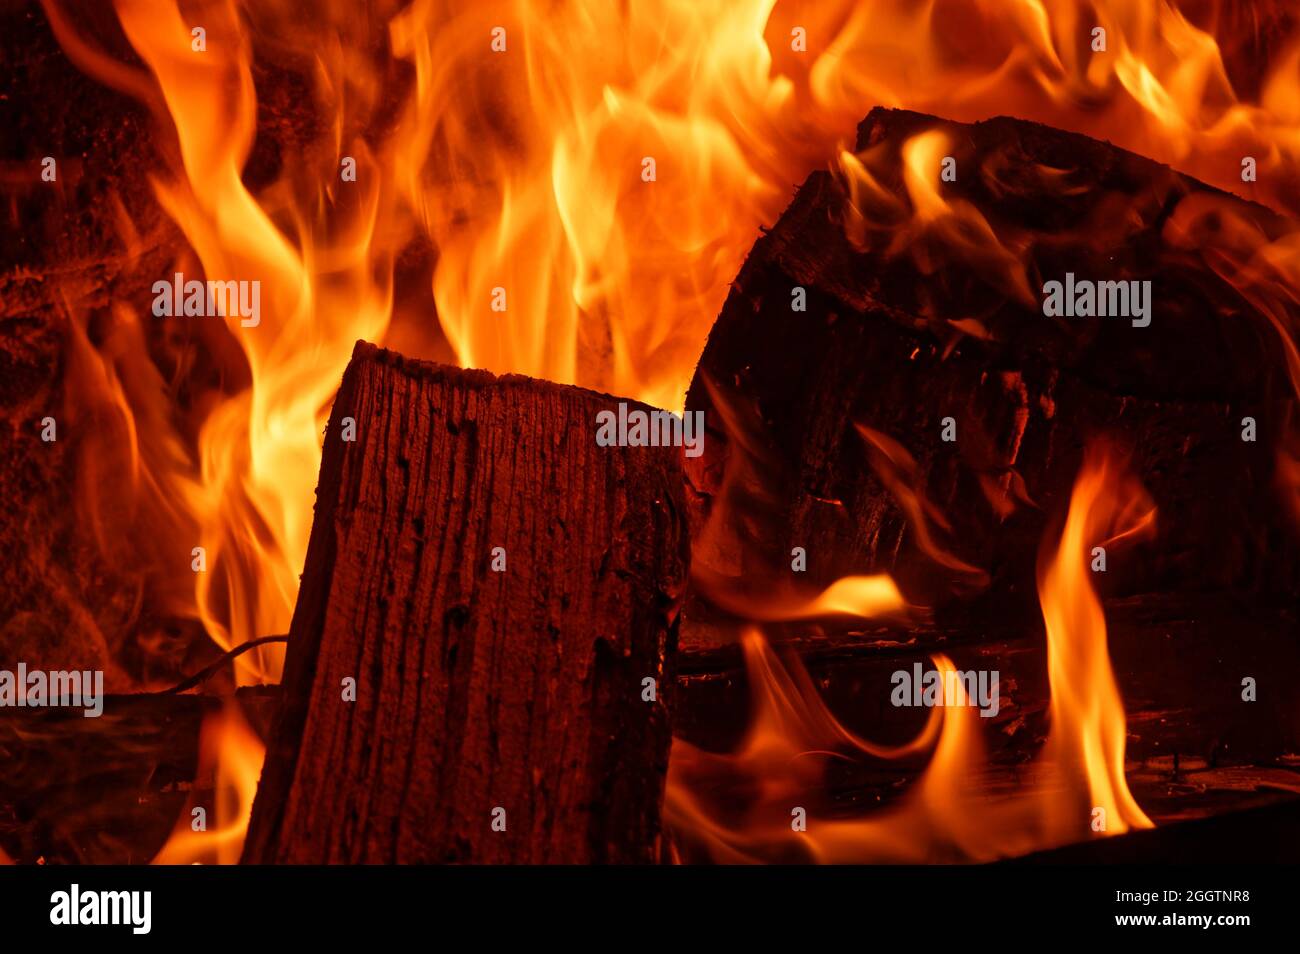 An open fire place is fueled with slabs of wood as fuel Stock Photo